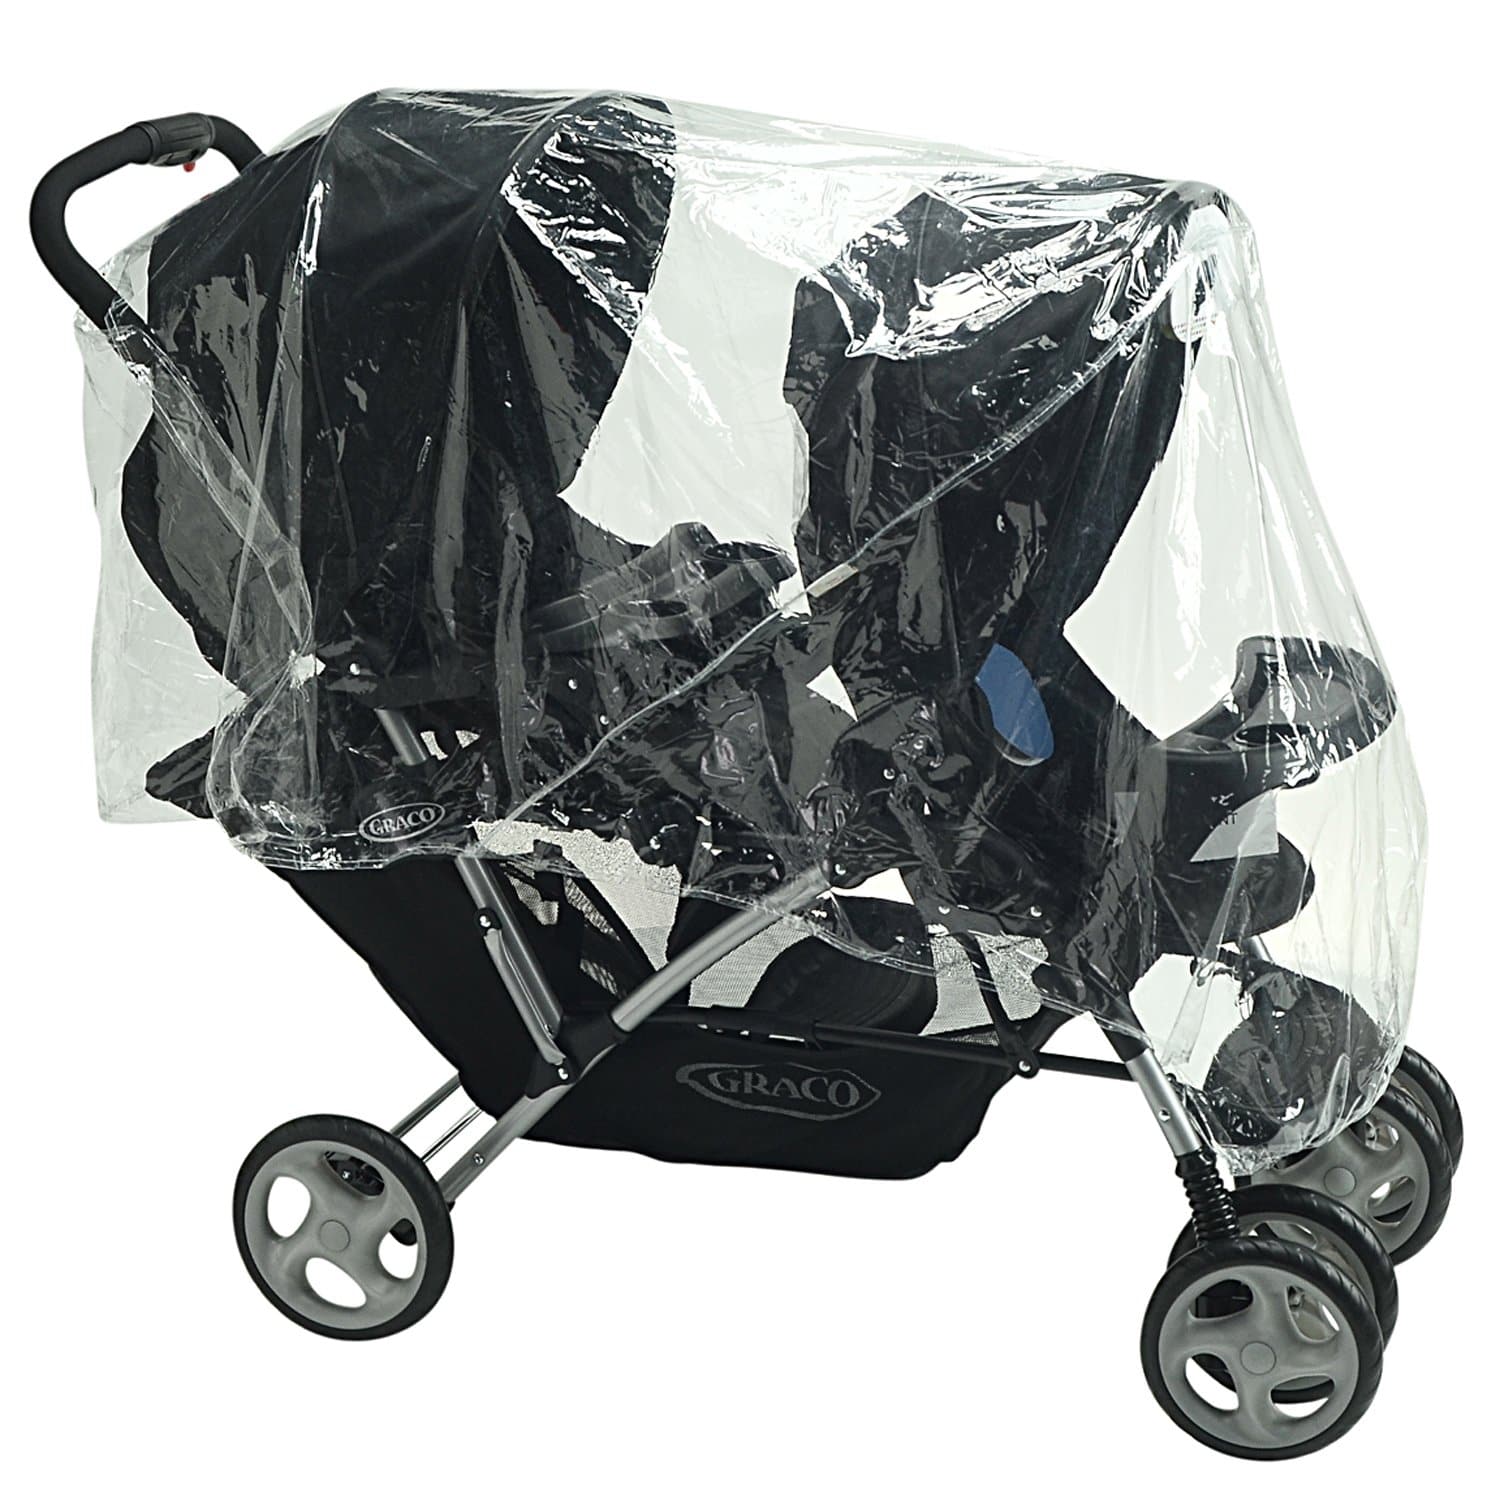 Universal Rain Cover For All Front And Back Pushchairs - For Your Little One